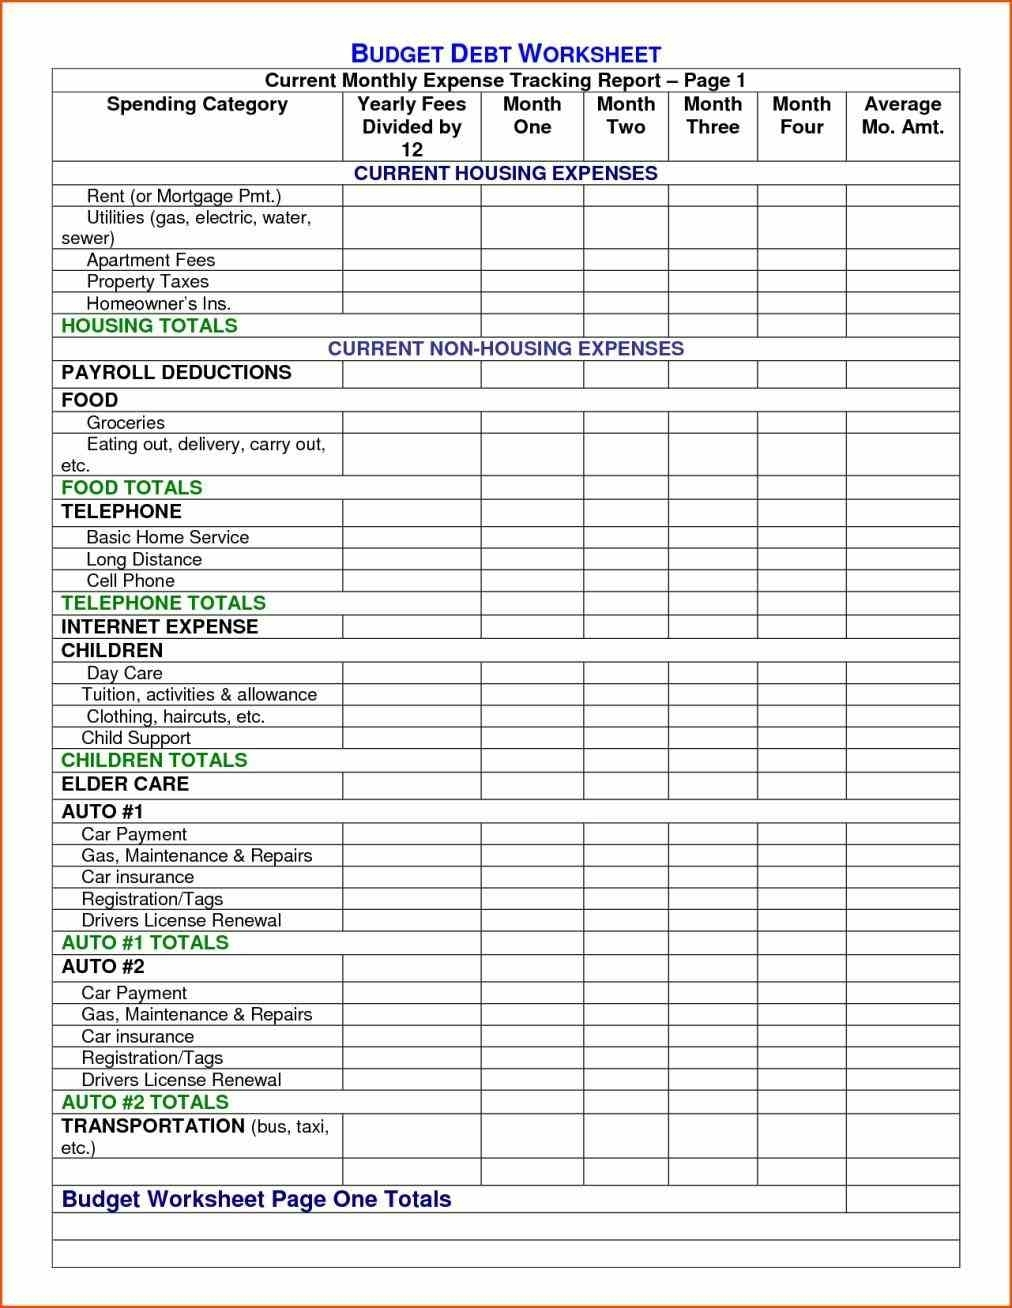 Insurance Certificate Tracking Spreadsheet And Contents Insurance For Insurance Sales Tracking Spreadsheet